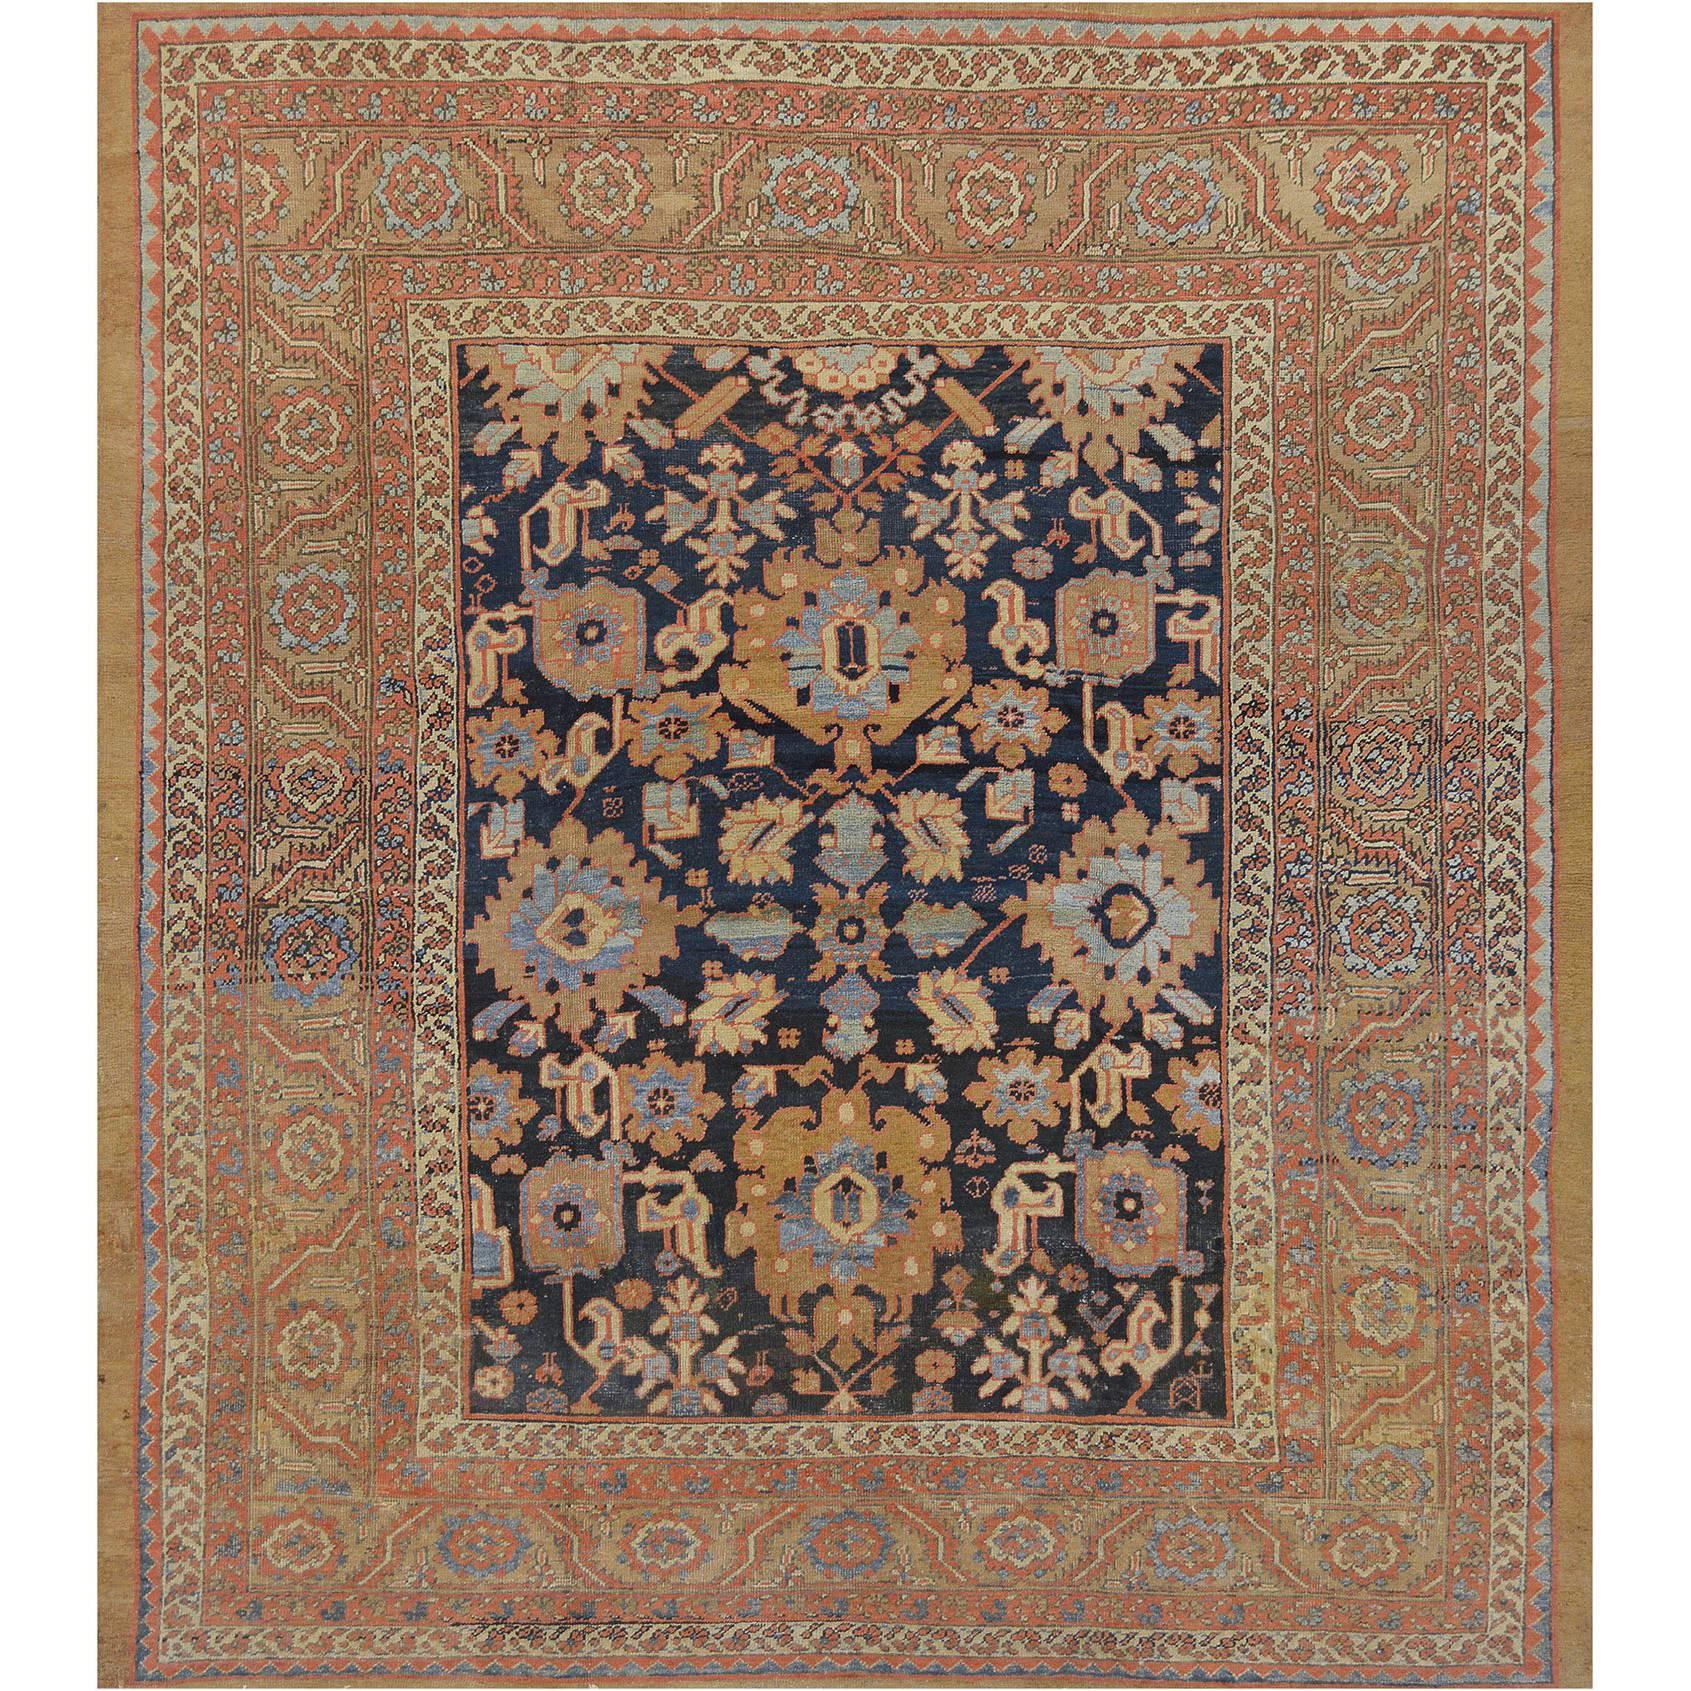 Late 19th Century Bakhshaish Rug from North West Persia